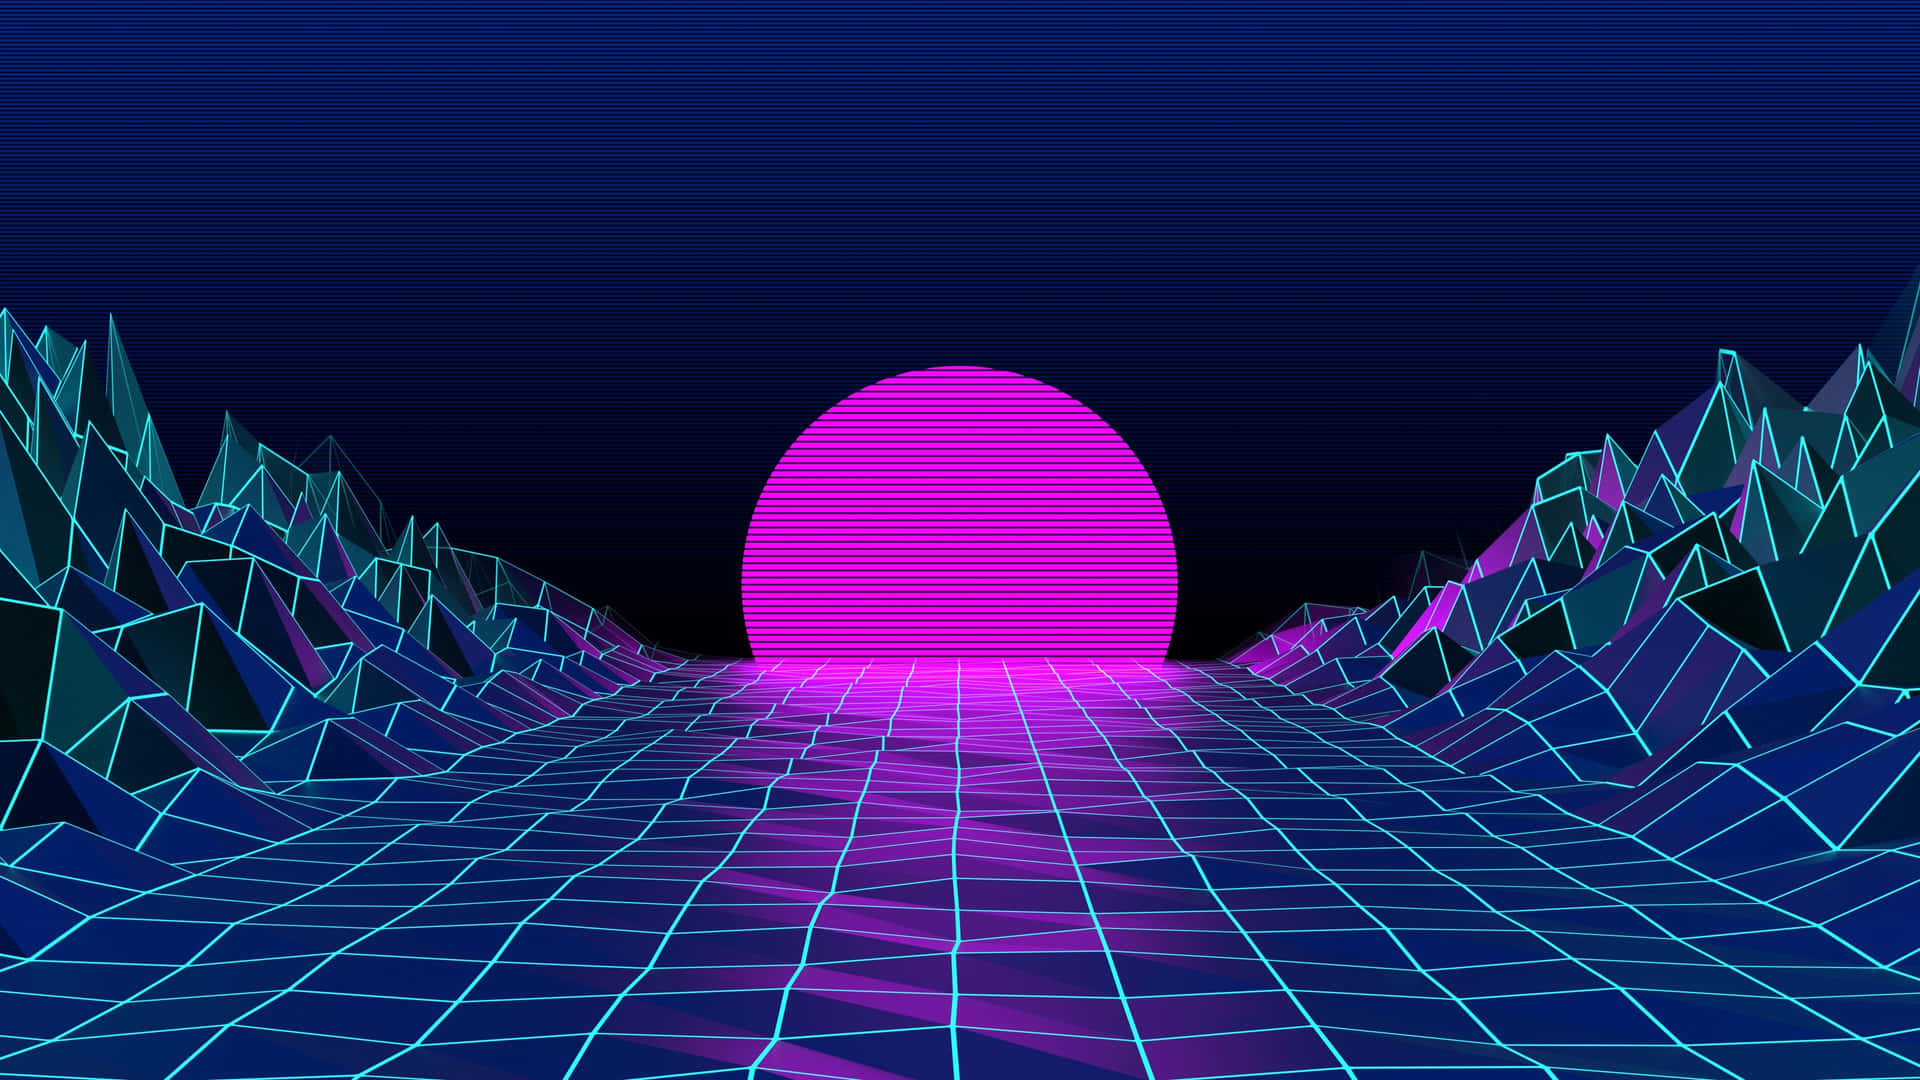 Y2k aesthetic wallpaper with vibrant colors